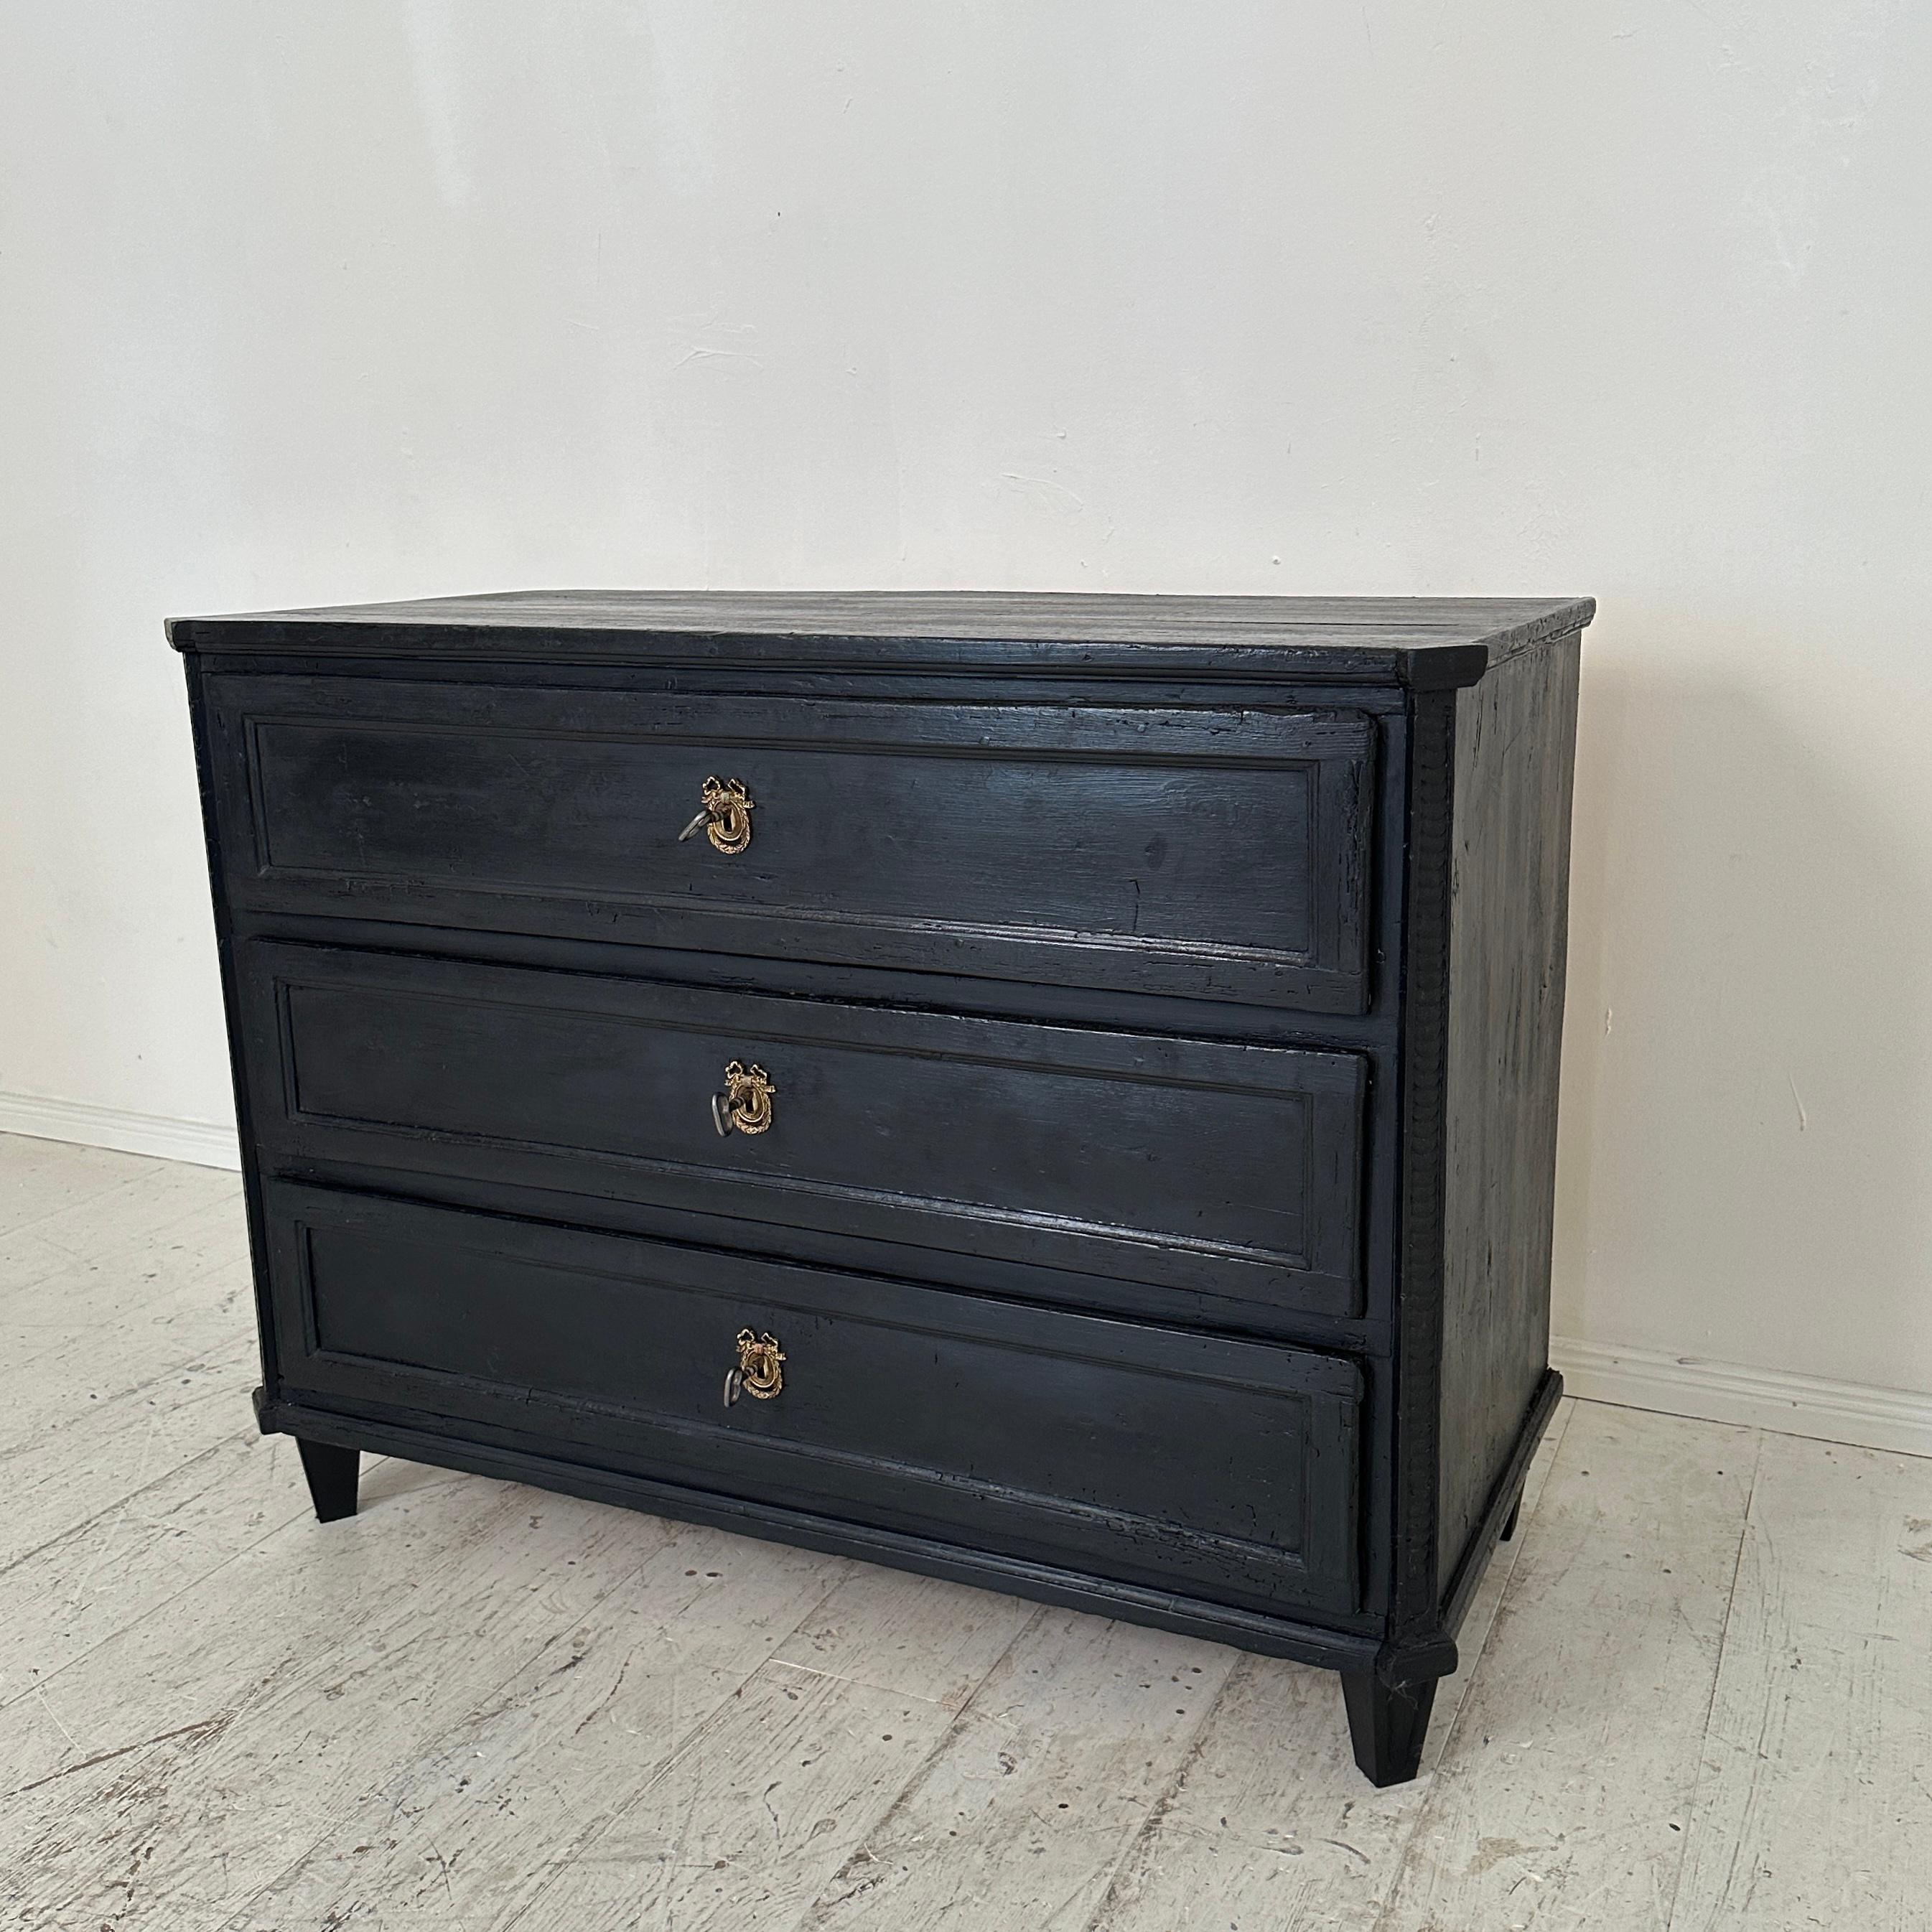 German Early 19th Century Black Empire Chest of Drawers with 3 Drawers, around 1800